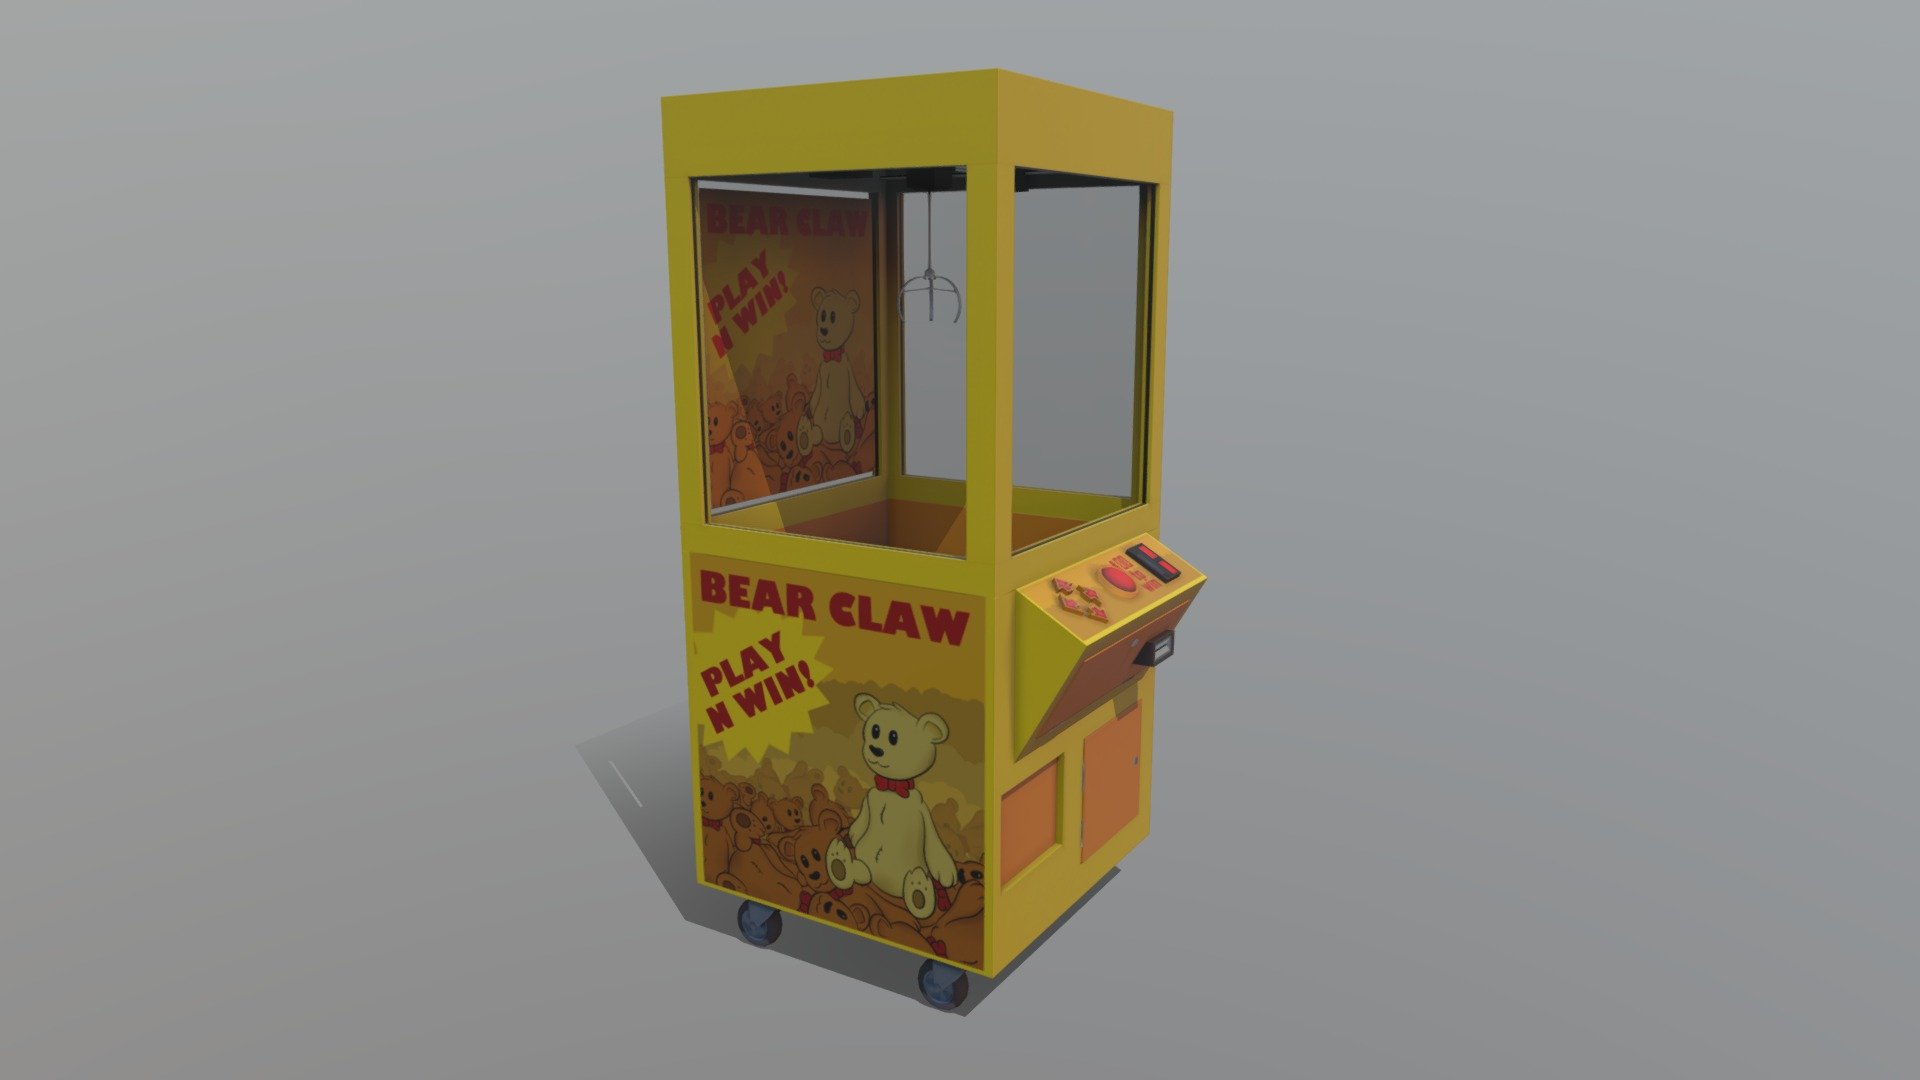 Simple Blender model of a claw Game machine.

Videos of the modeling and texturing process can be found here:

https://youtu.be/eip3aOM7EQg
https://youtu.be/oN7WCdrZ7g8
https://youtu.be/dvEpgq_NsvE

The model has been simplified for the purposes of uploading to Sketchfab 3d model